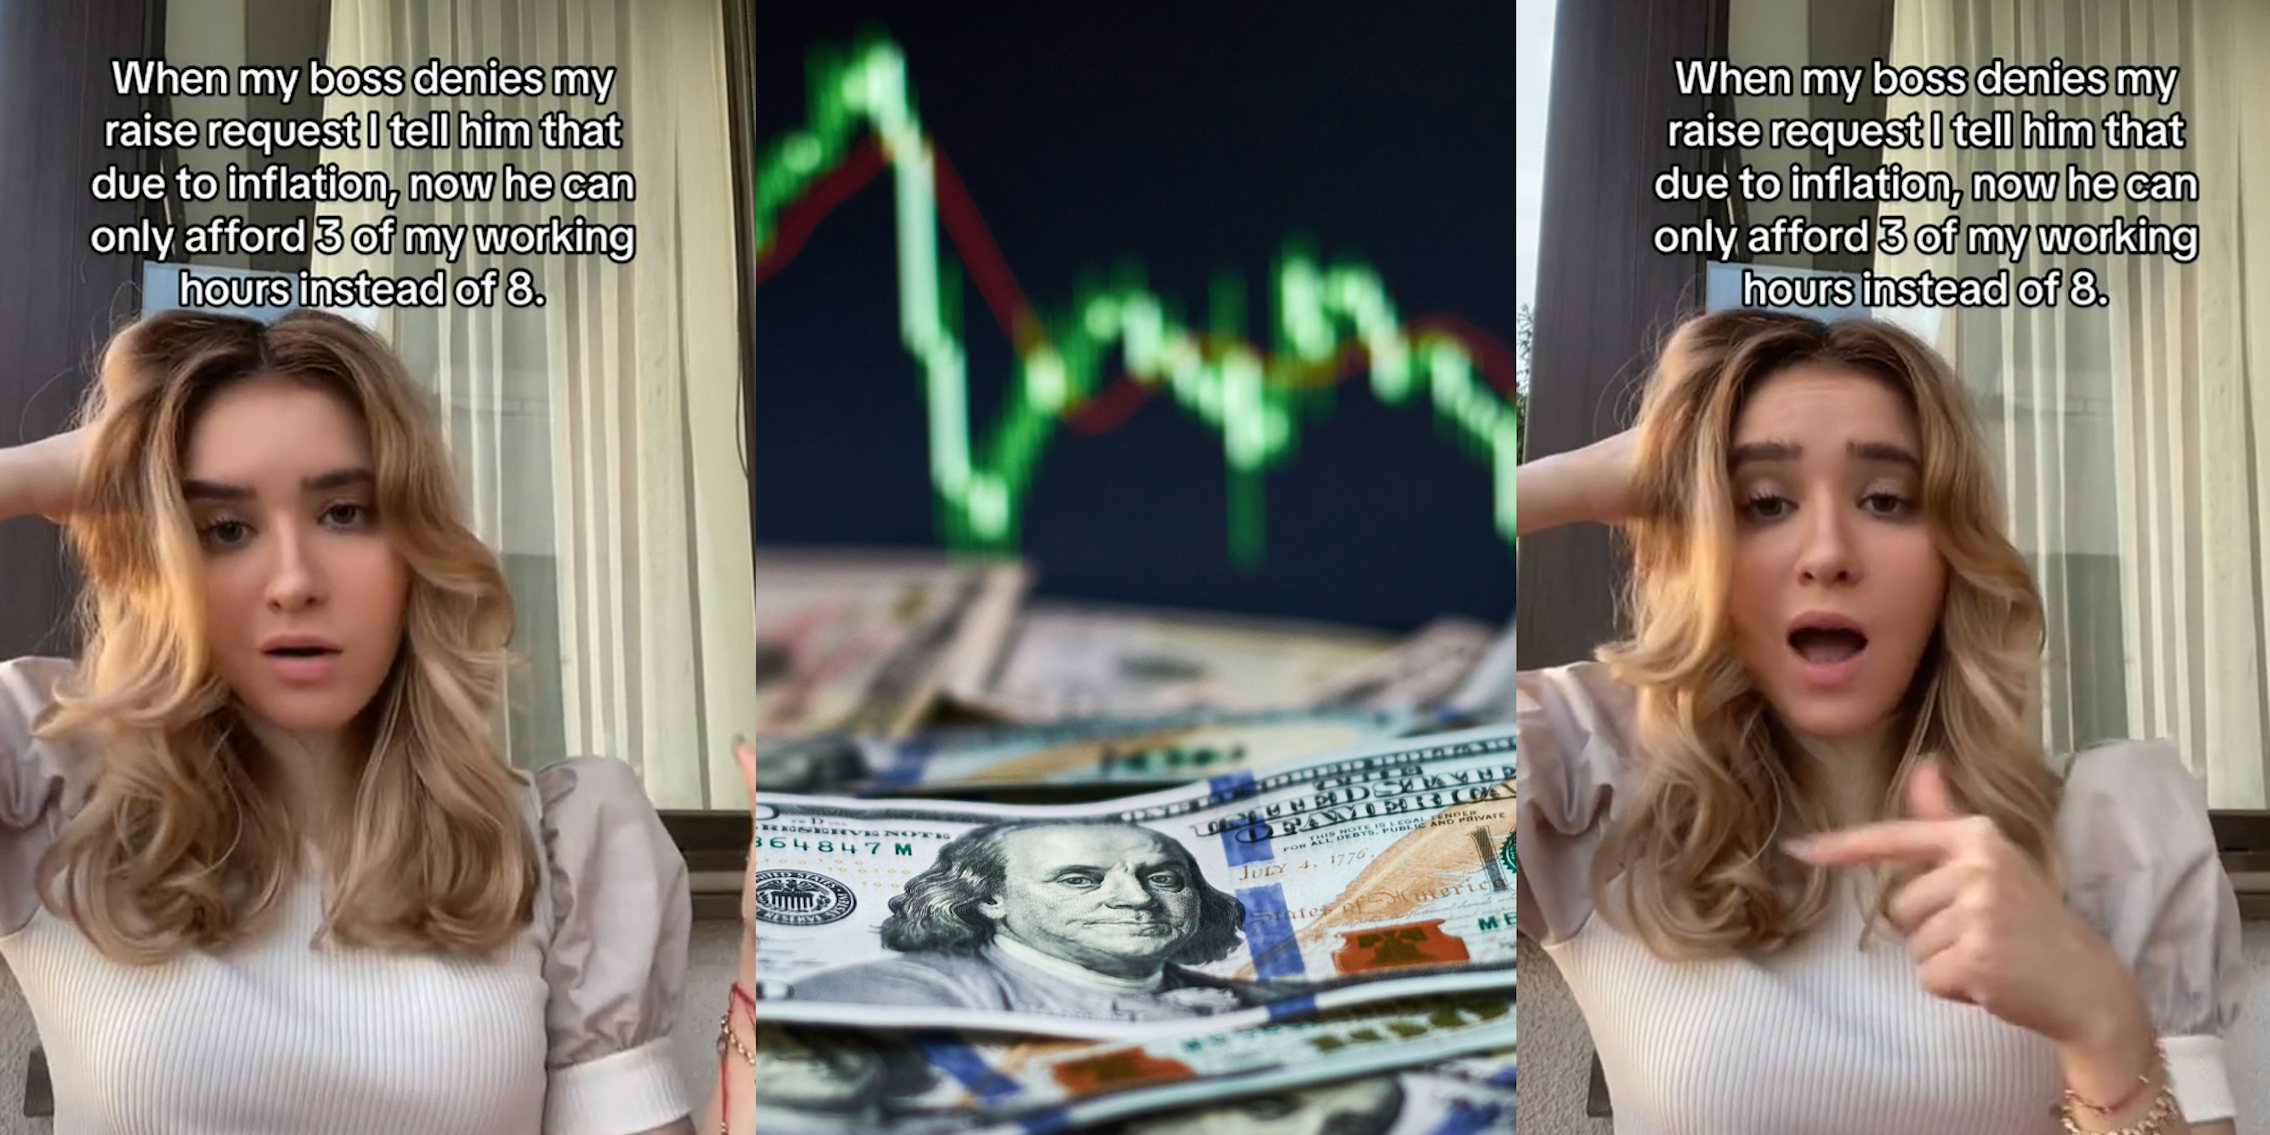 woman speaking with caption 'When my boss denies my raise request I tell him that due to inflation, now he can only afford 3 of my working hours instead of 8.' (l) 100 dollar bills in front of graph inflation concept (c) woman speaking with caption 'When my boss denies my raise request I tell him that due to inflation, now he can only afford 3 of my working hours instead of 8.' (r)